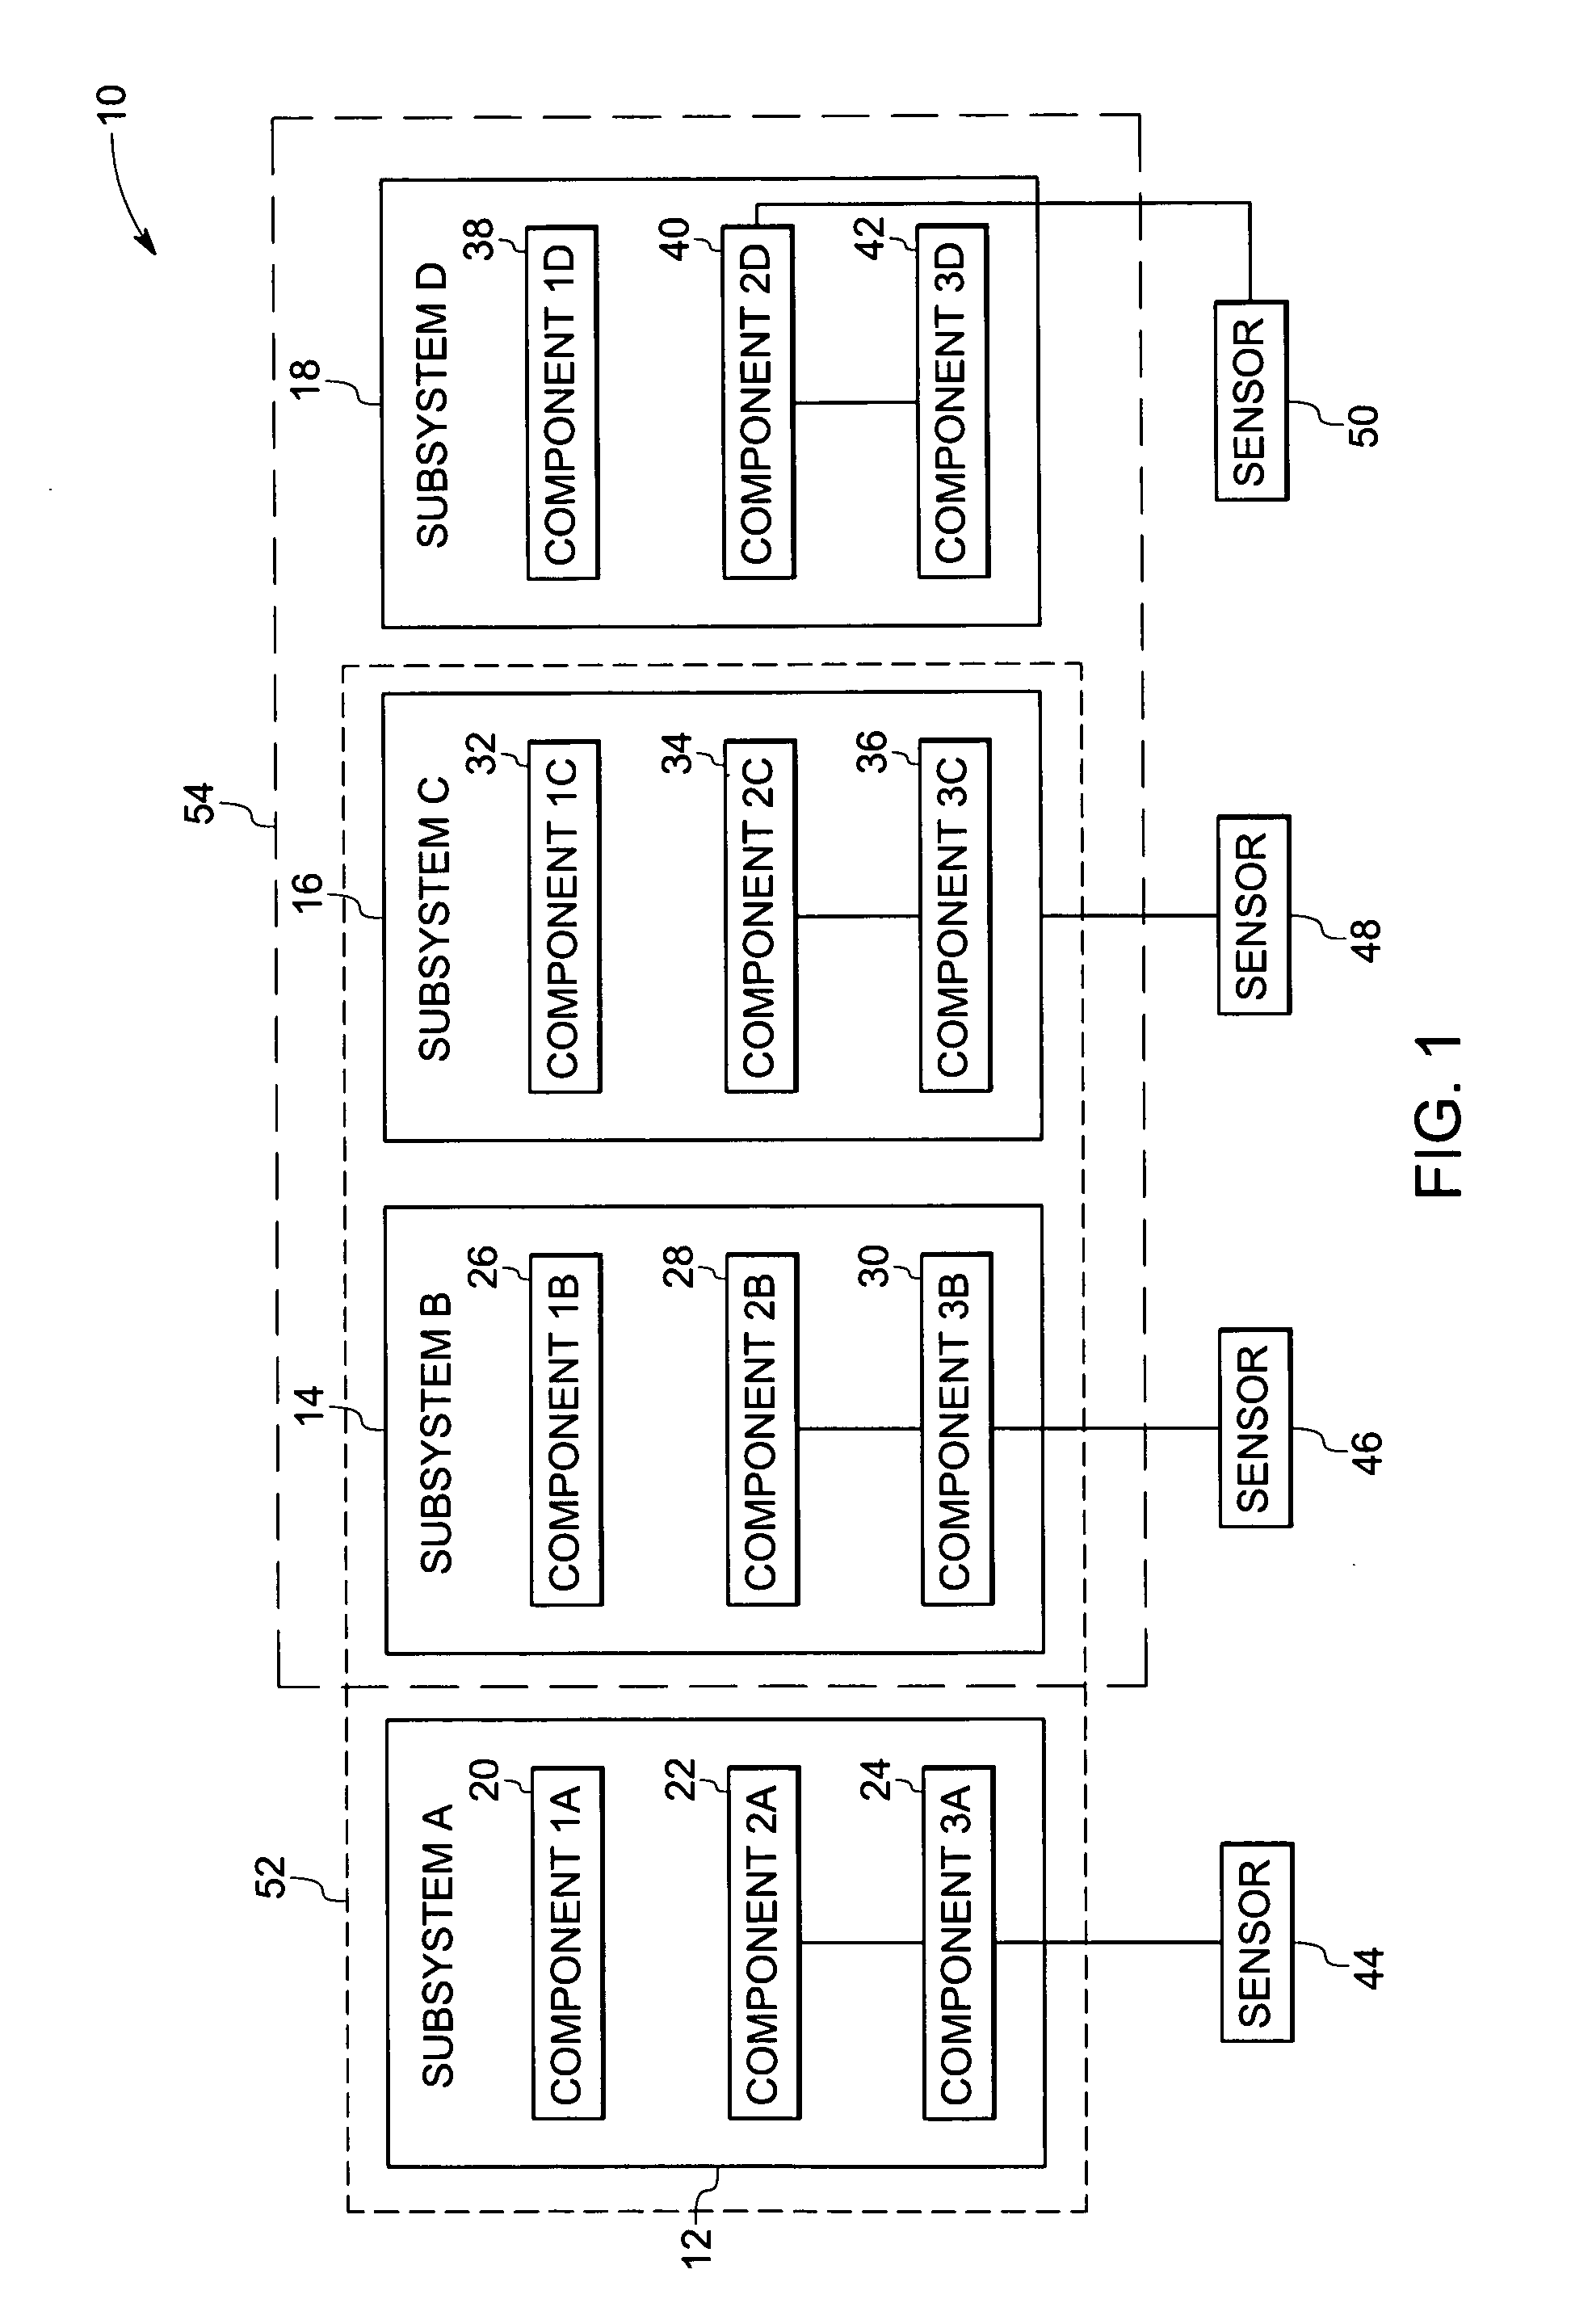 Method and system for hierarchical fault classification and diagnosis in large systems